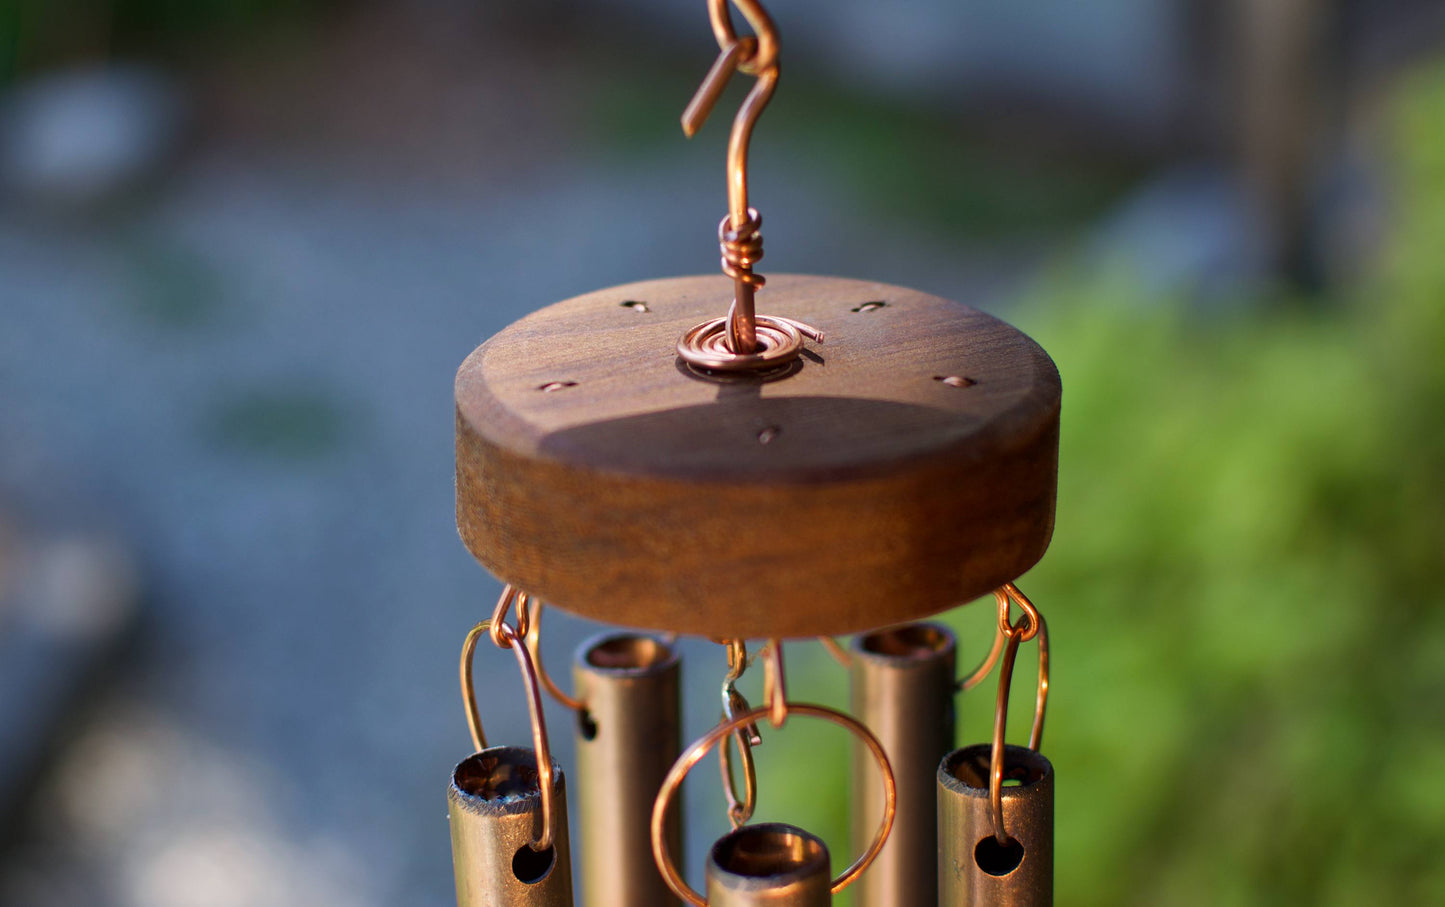 Wind Chime Outdoor Large Glass Copper Windchimes